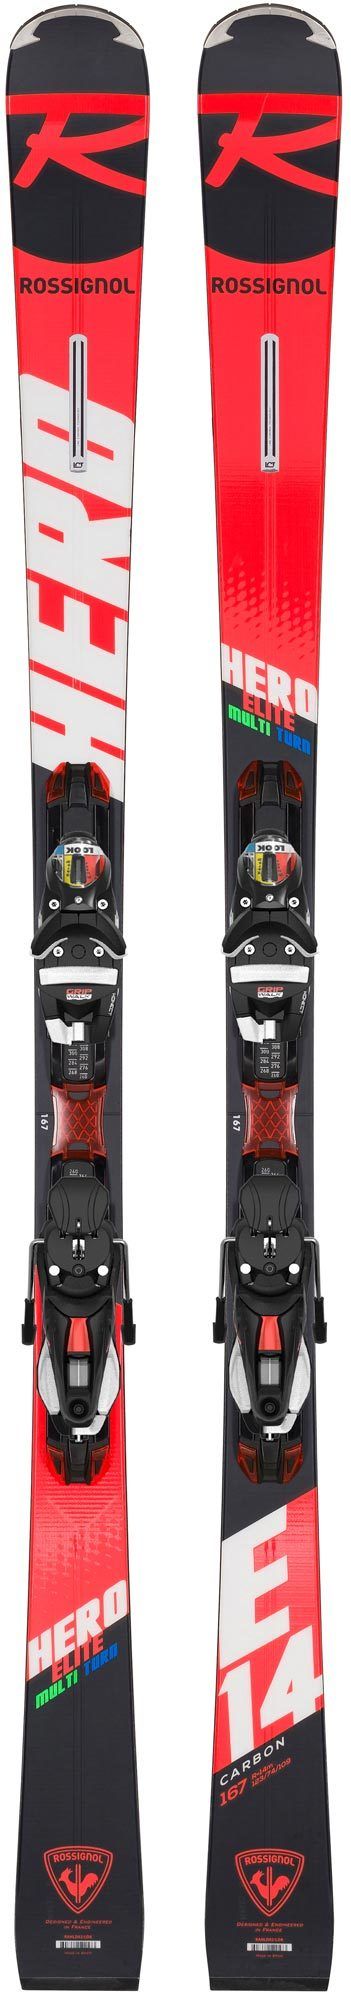 Pack Skis Test/Occasion Hero Elite MT CA 2020 + Fixations NX12 Konect